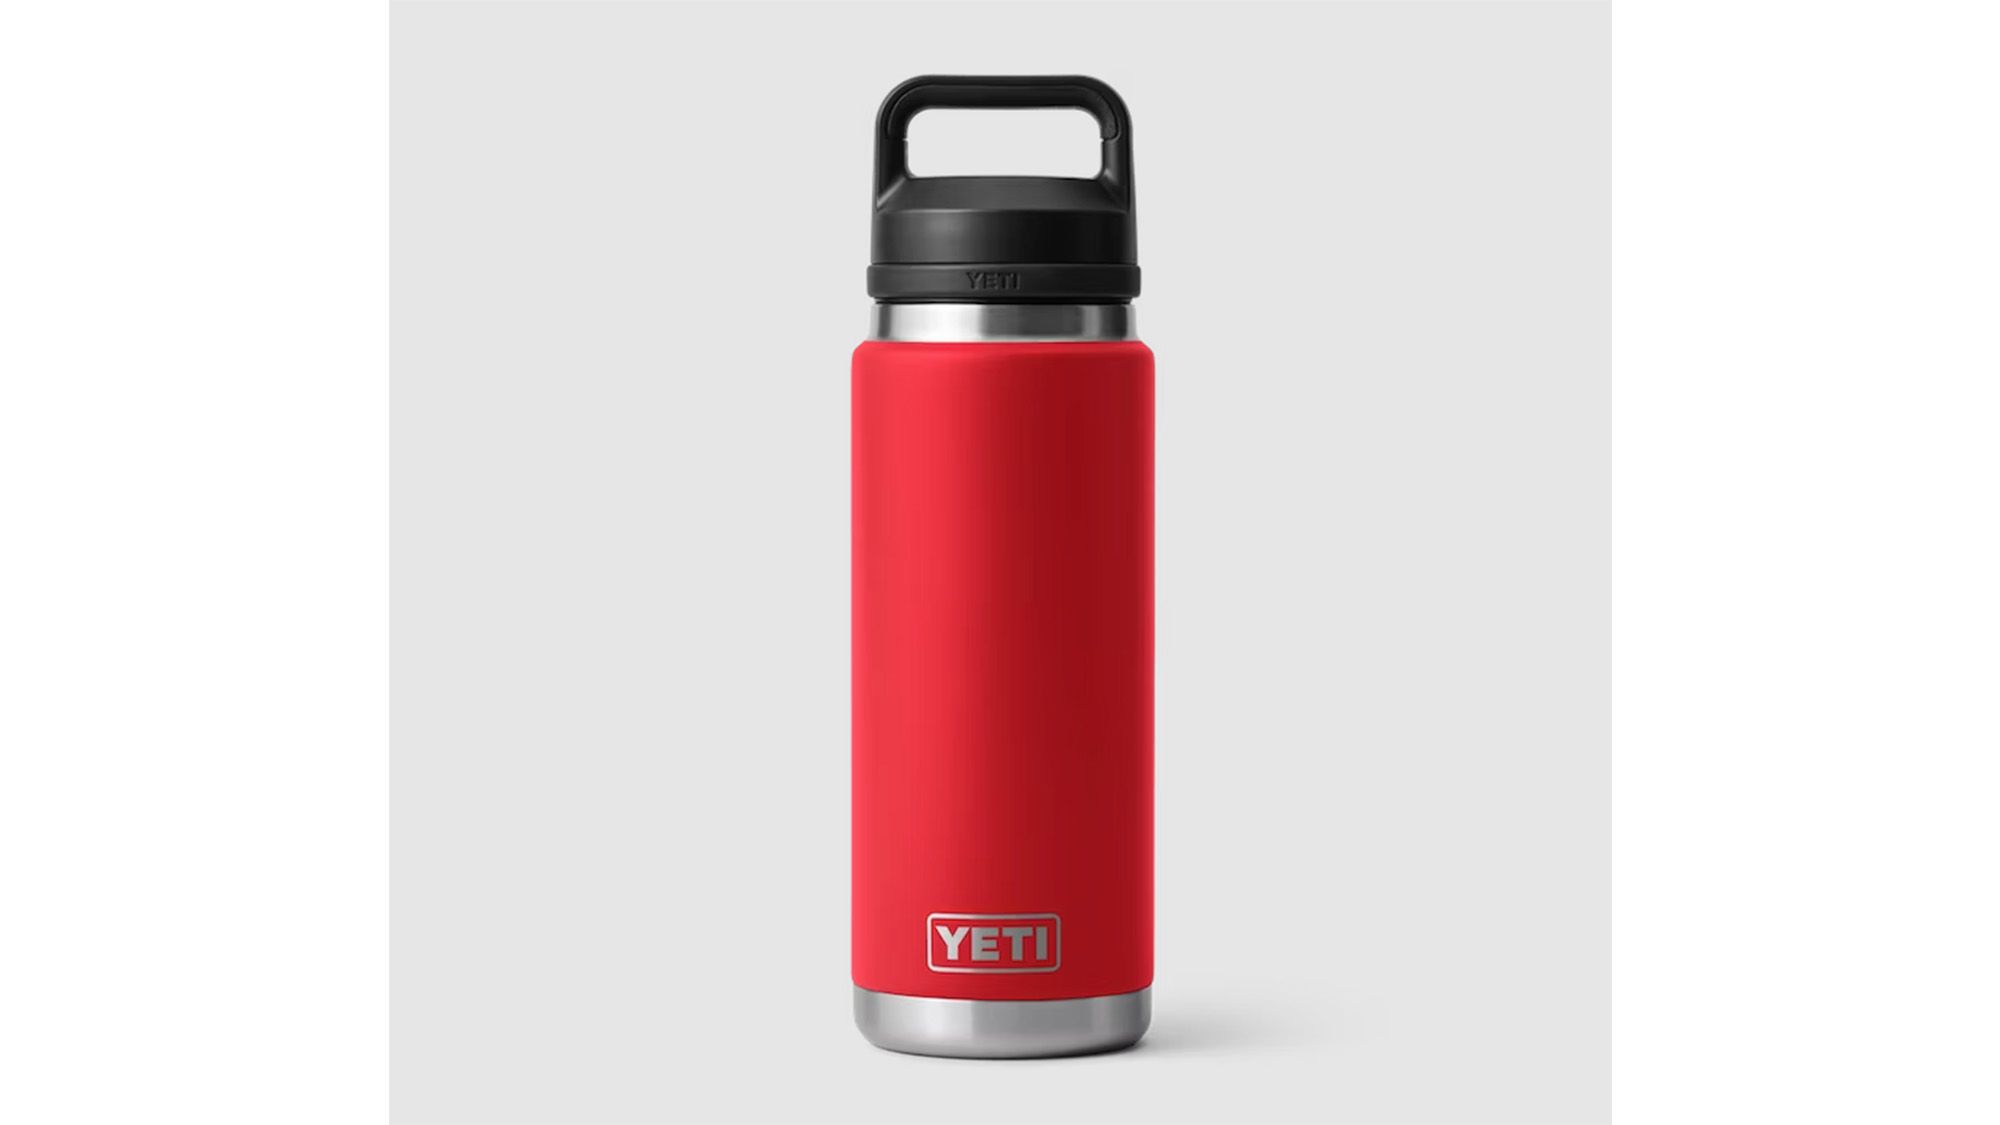 Adventures await with @Yeti's new Rescue Red Collection cooler! 🚒❄️  Perfect for keeping drinks and snacks icy cold on all our outdoor…